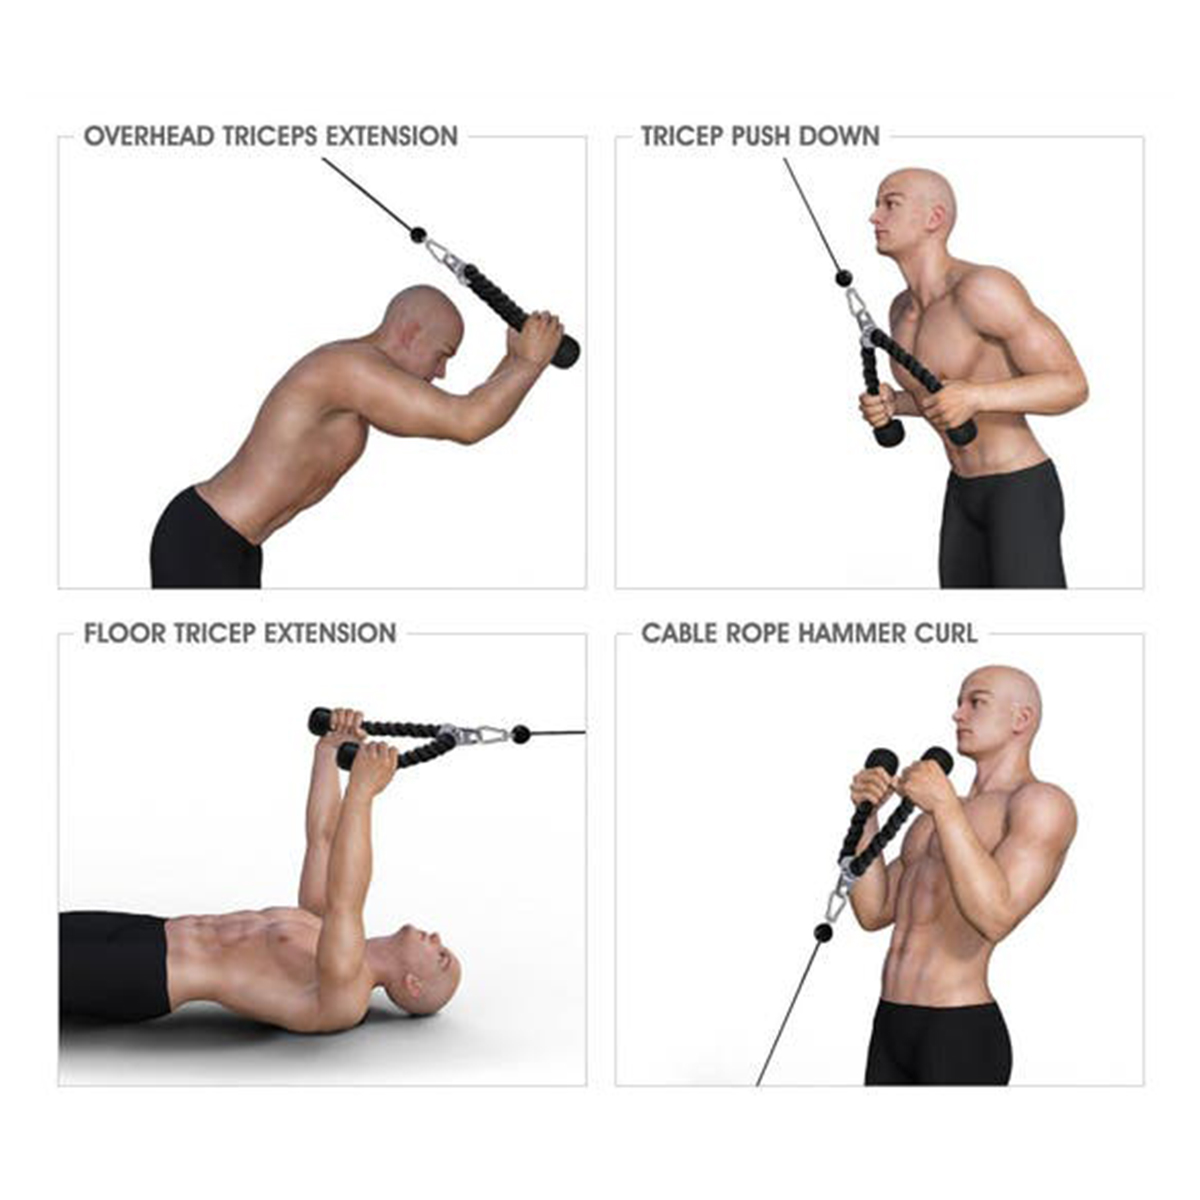 7PCSSET-Tricep-Bicep-Pull-Rope-Cable-Muscle-Strength-Training-Attachment-Home-Gym-Exercise-1851395-4